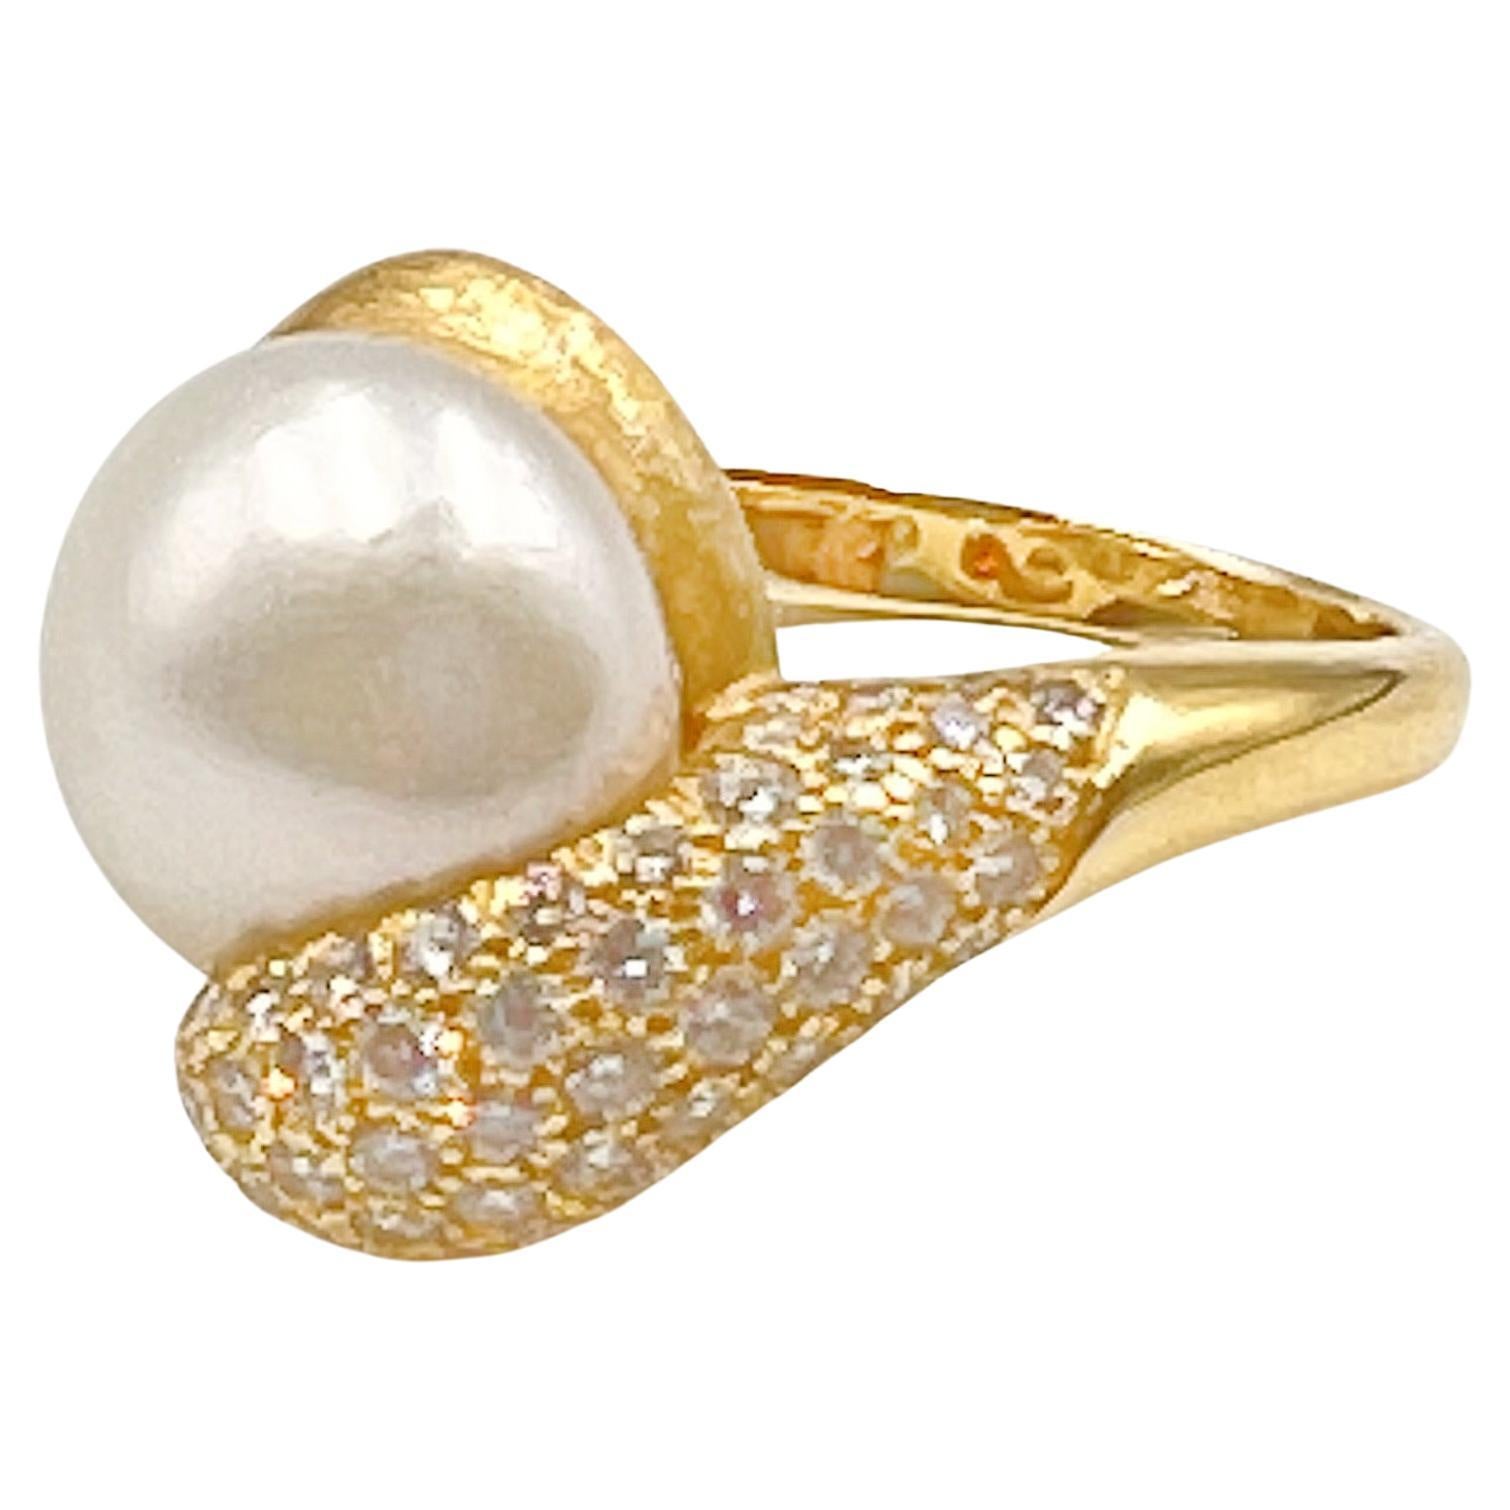 Henry Dunay South Sea pearl and diamond ring with the 'Sabi' finish.  Set with one South Sea cultured pearl measuring 13.25mm.  One side of the mounting is pave-set with 68 round brilliant-cut diamonds weighing approximately 1.70 total carats (F-G